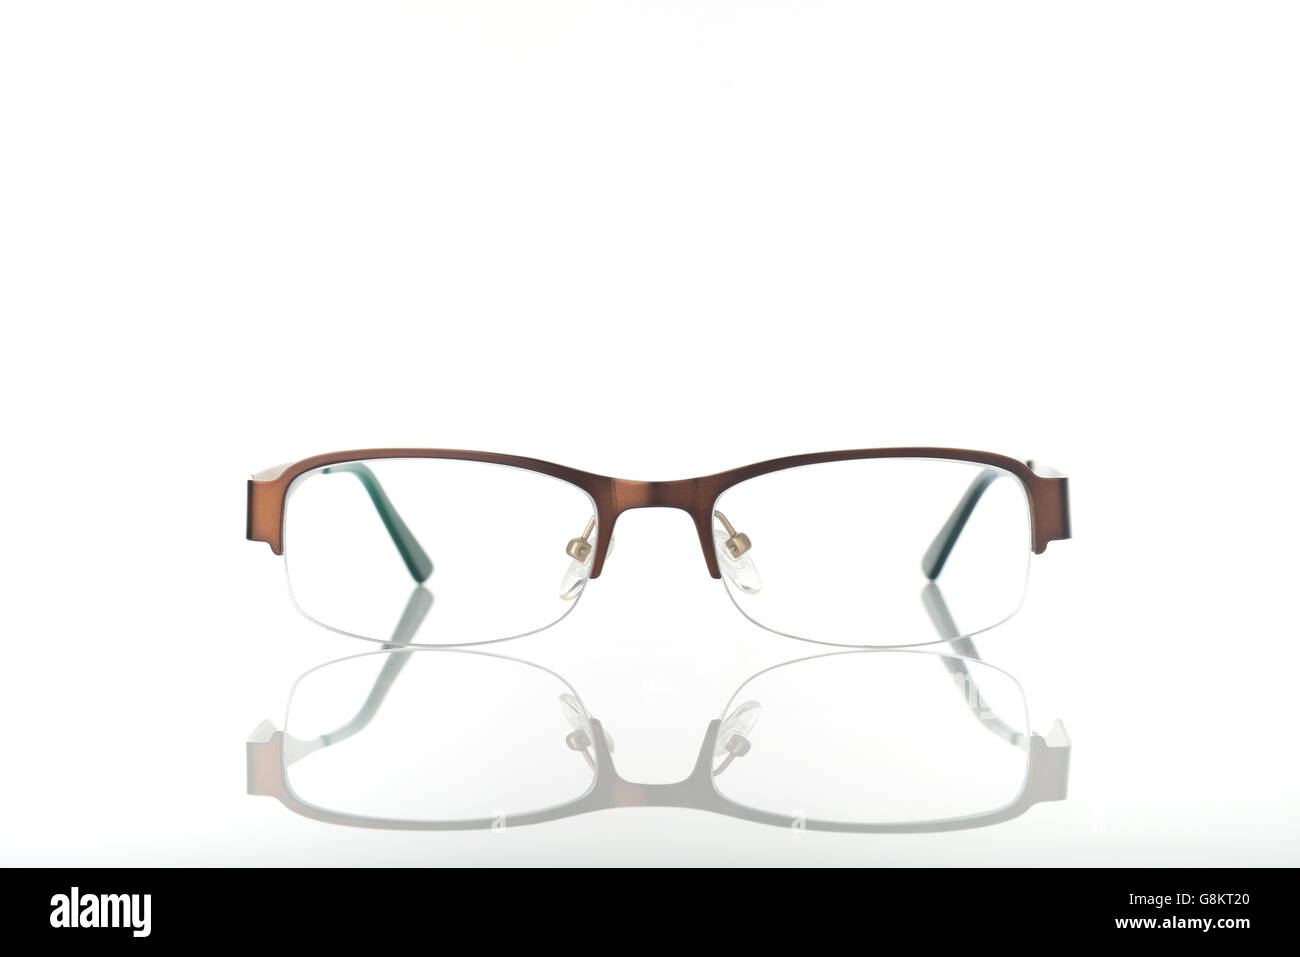 Front view of Eyeglasses with Metal Frame Stock Photo